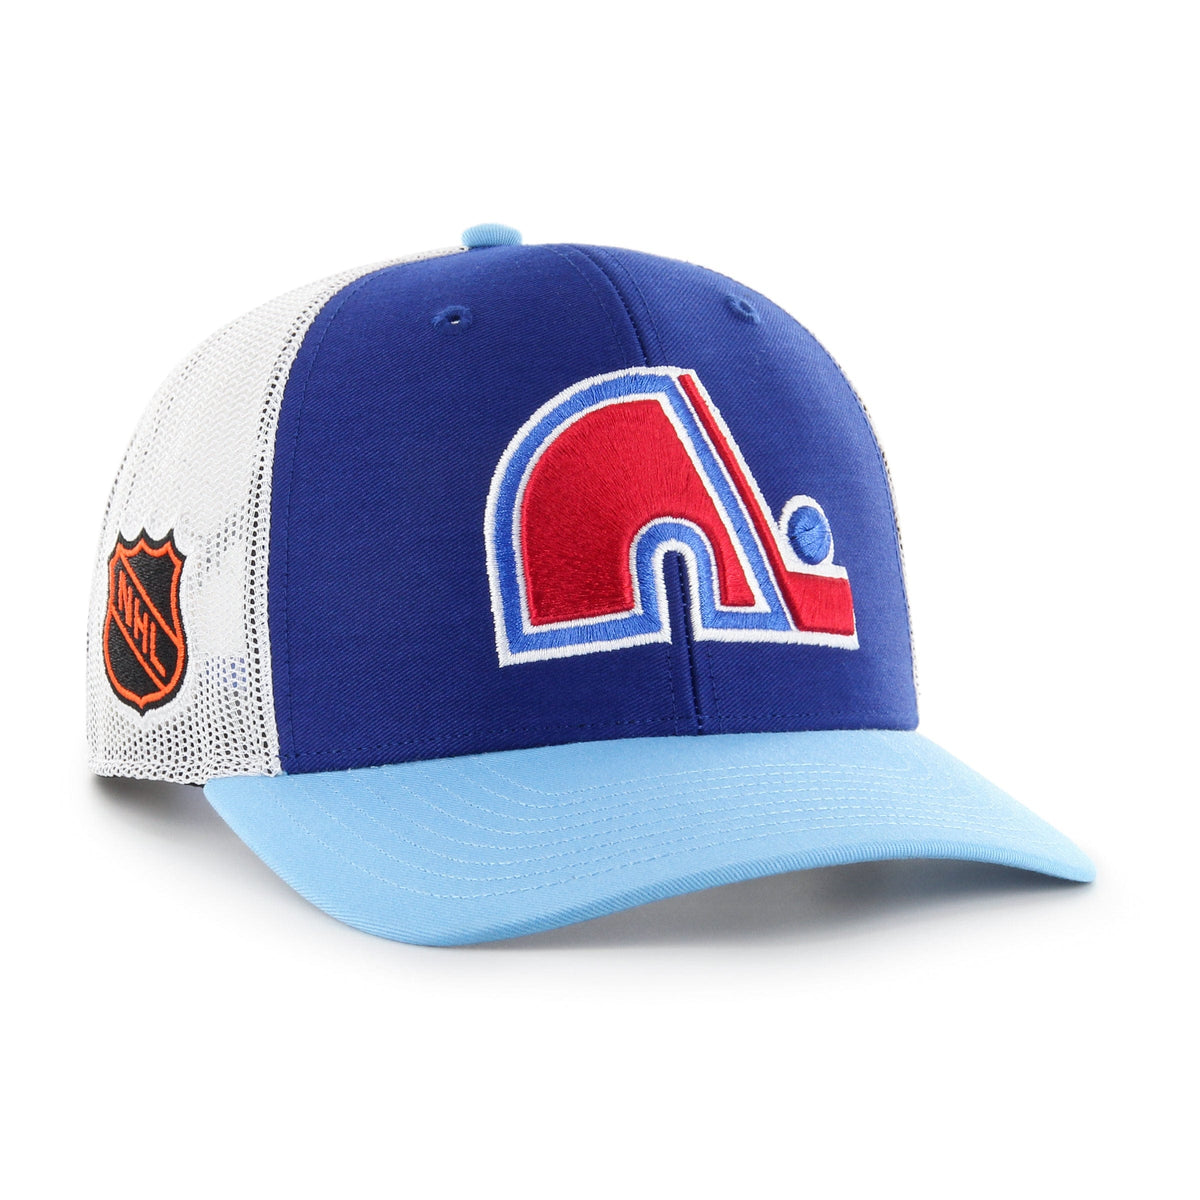 Mitchell & Ness Quebec Nordiques '22-'23 Special Edition Lockup Snapback Adjustable Hat, Men's, Blue